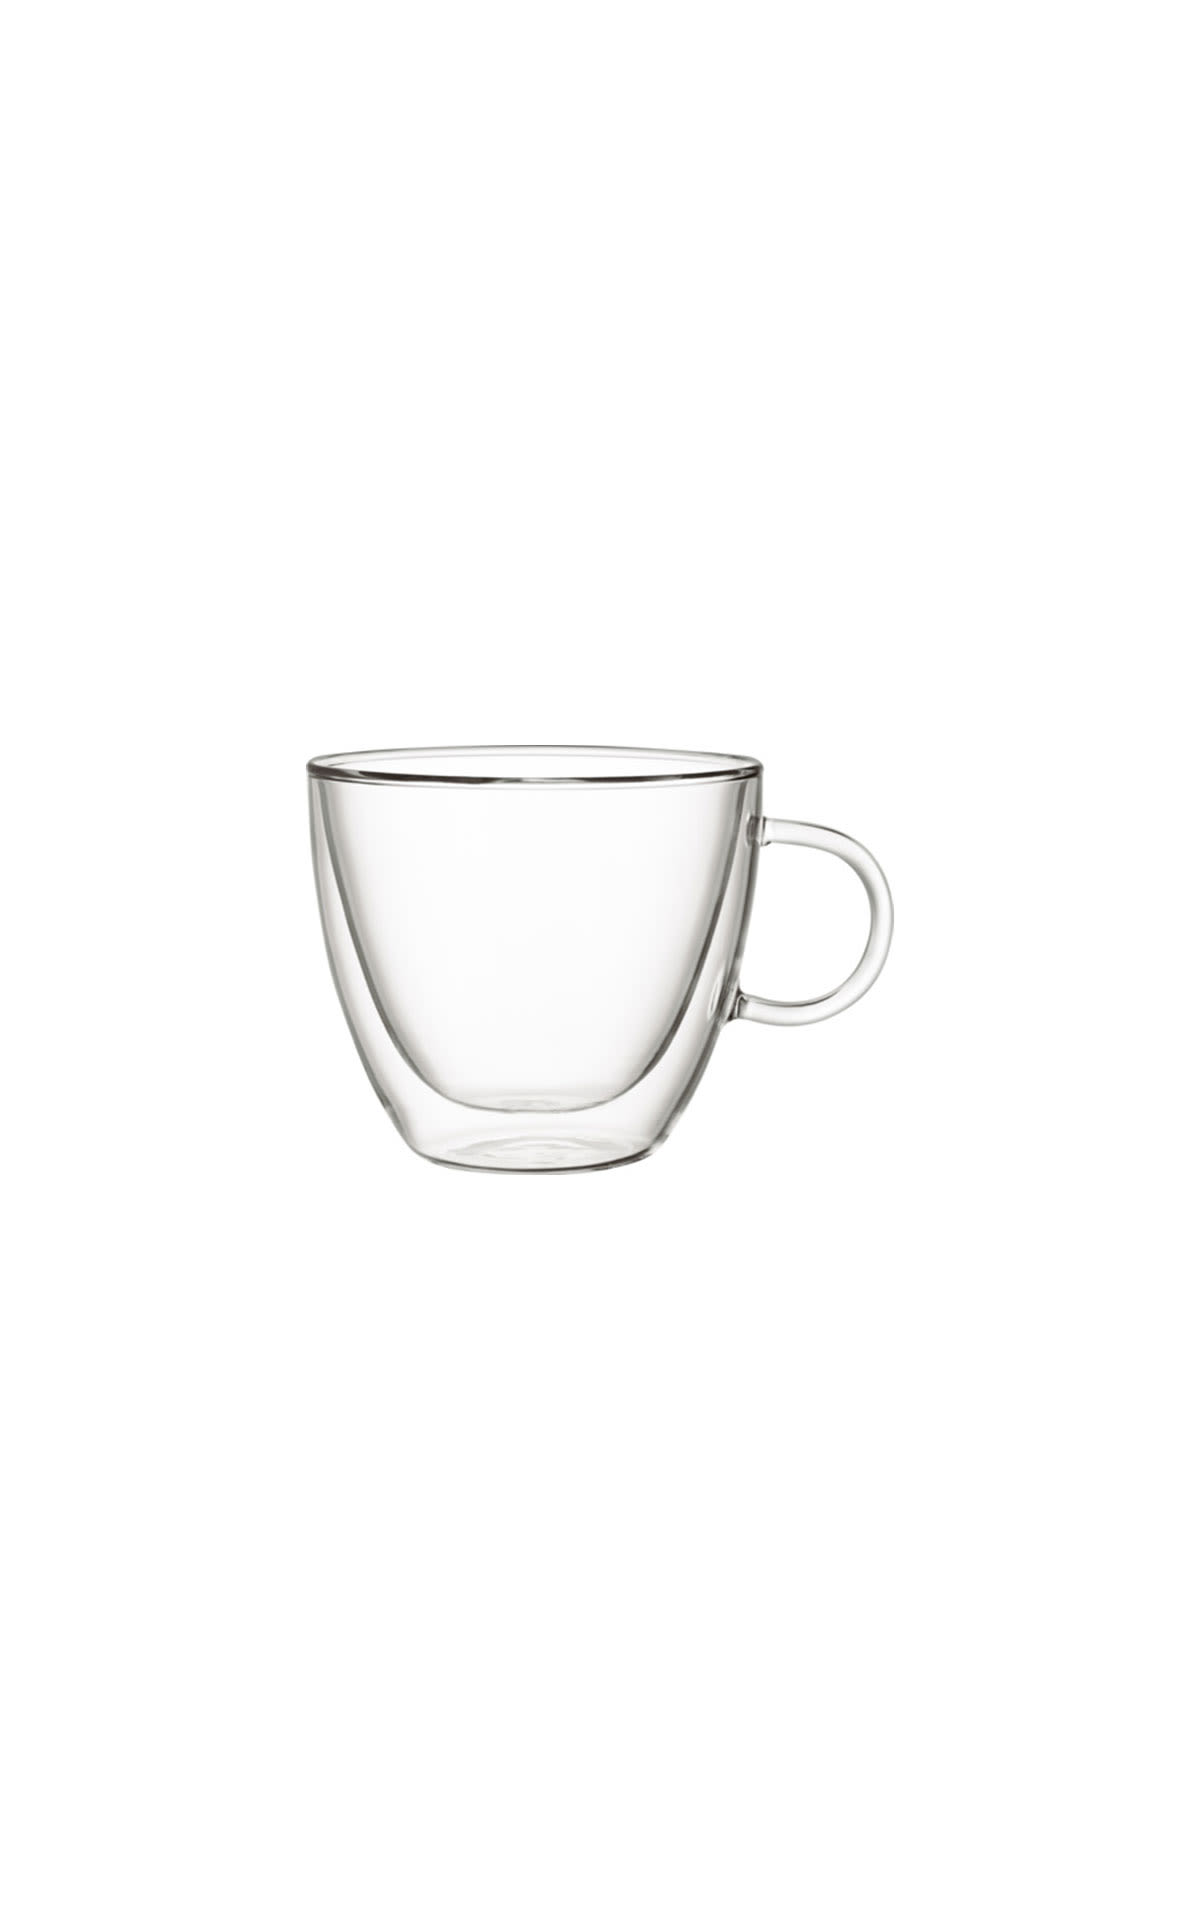 Villeroy & Boch Cup L set of two from Bicester Village